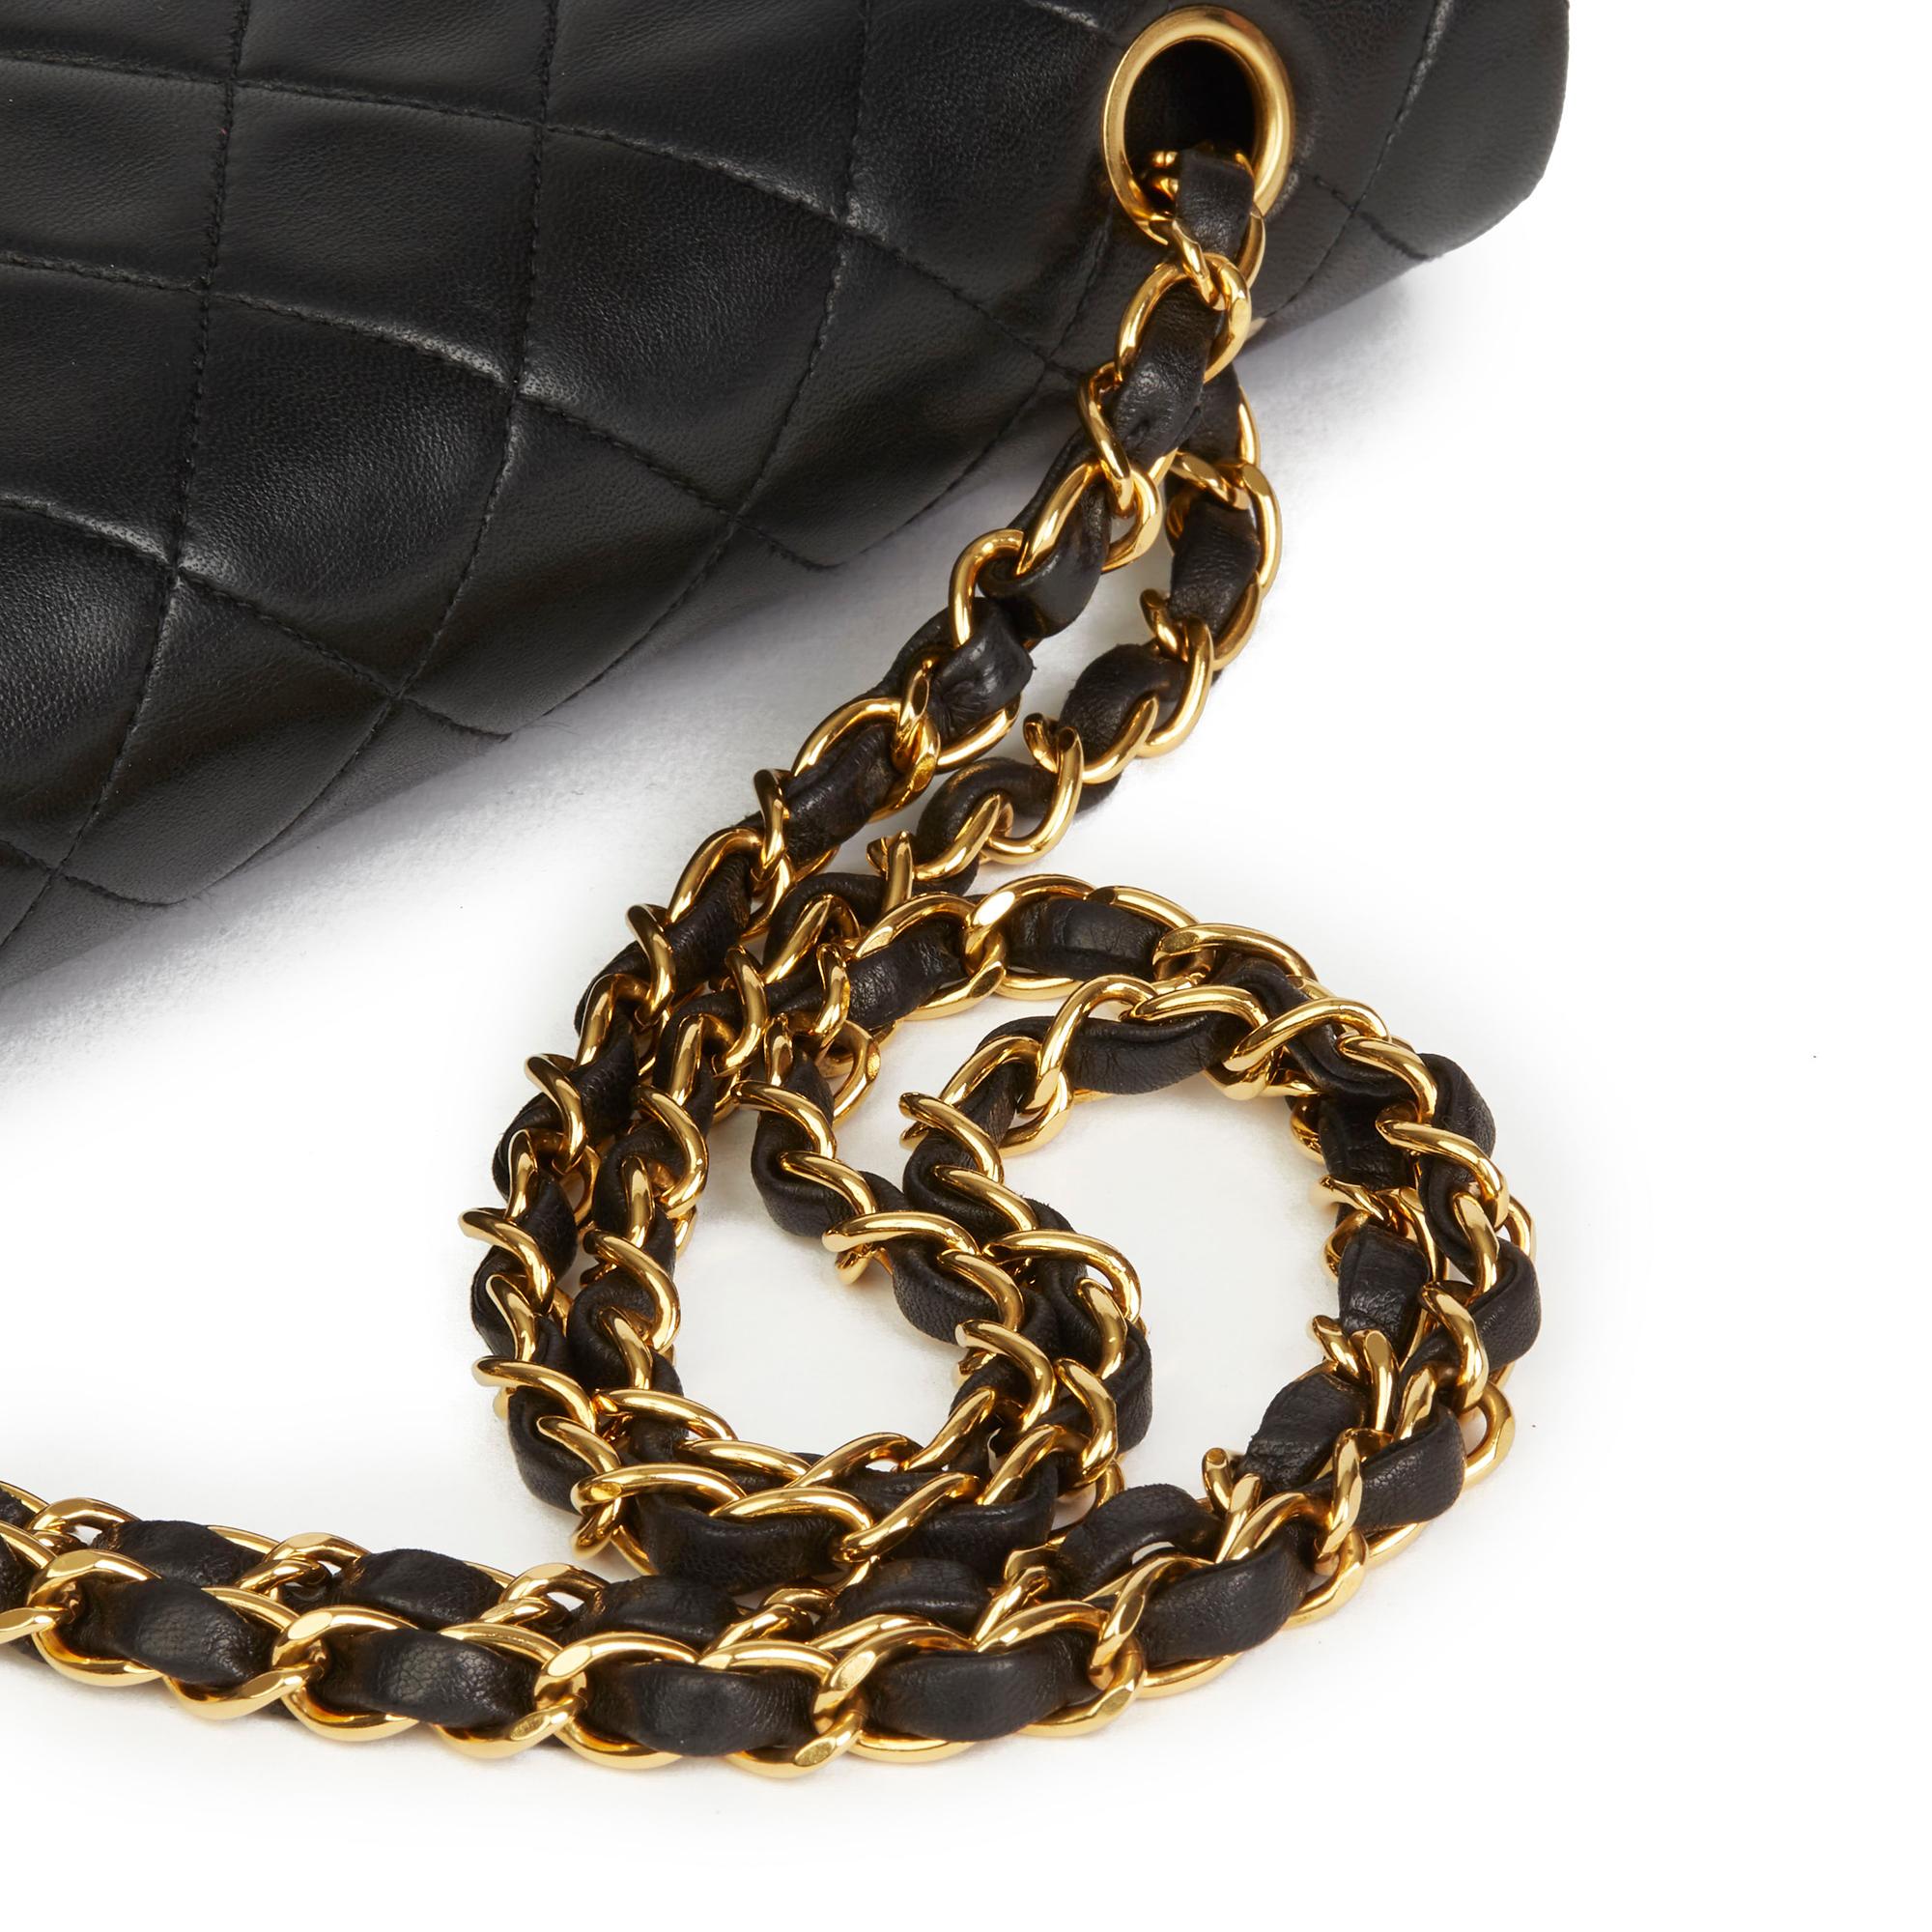 1995 Chanel Black Quilted Lambskin Vintage Medium Classic Double Flap Bag 3